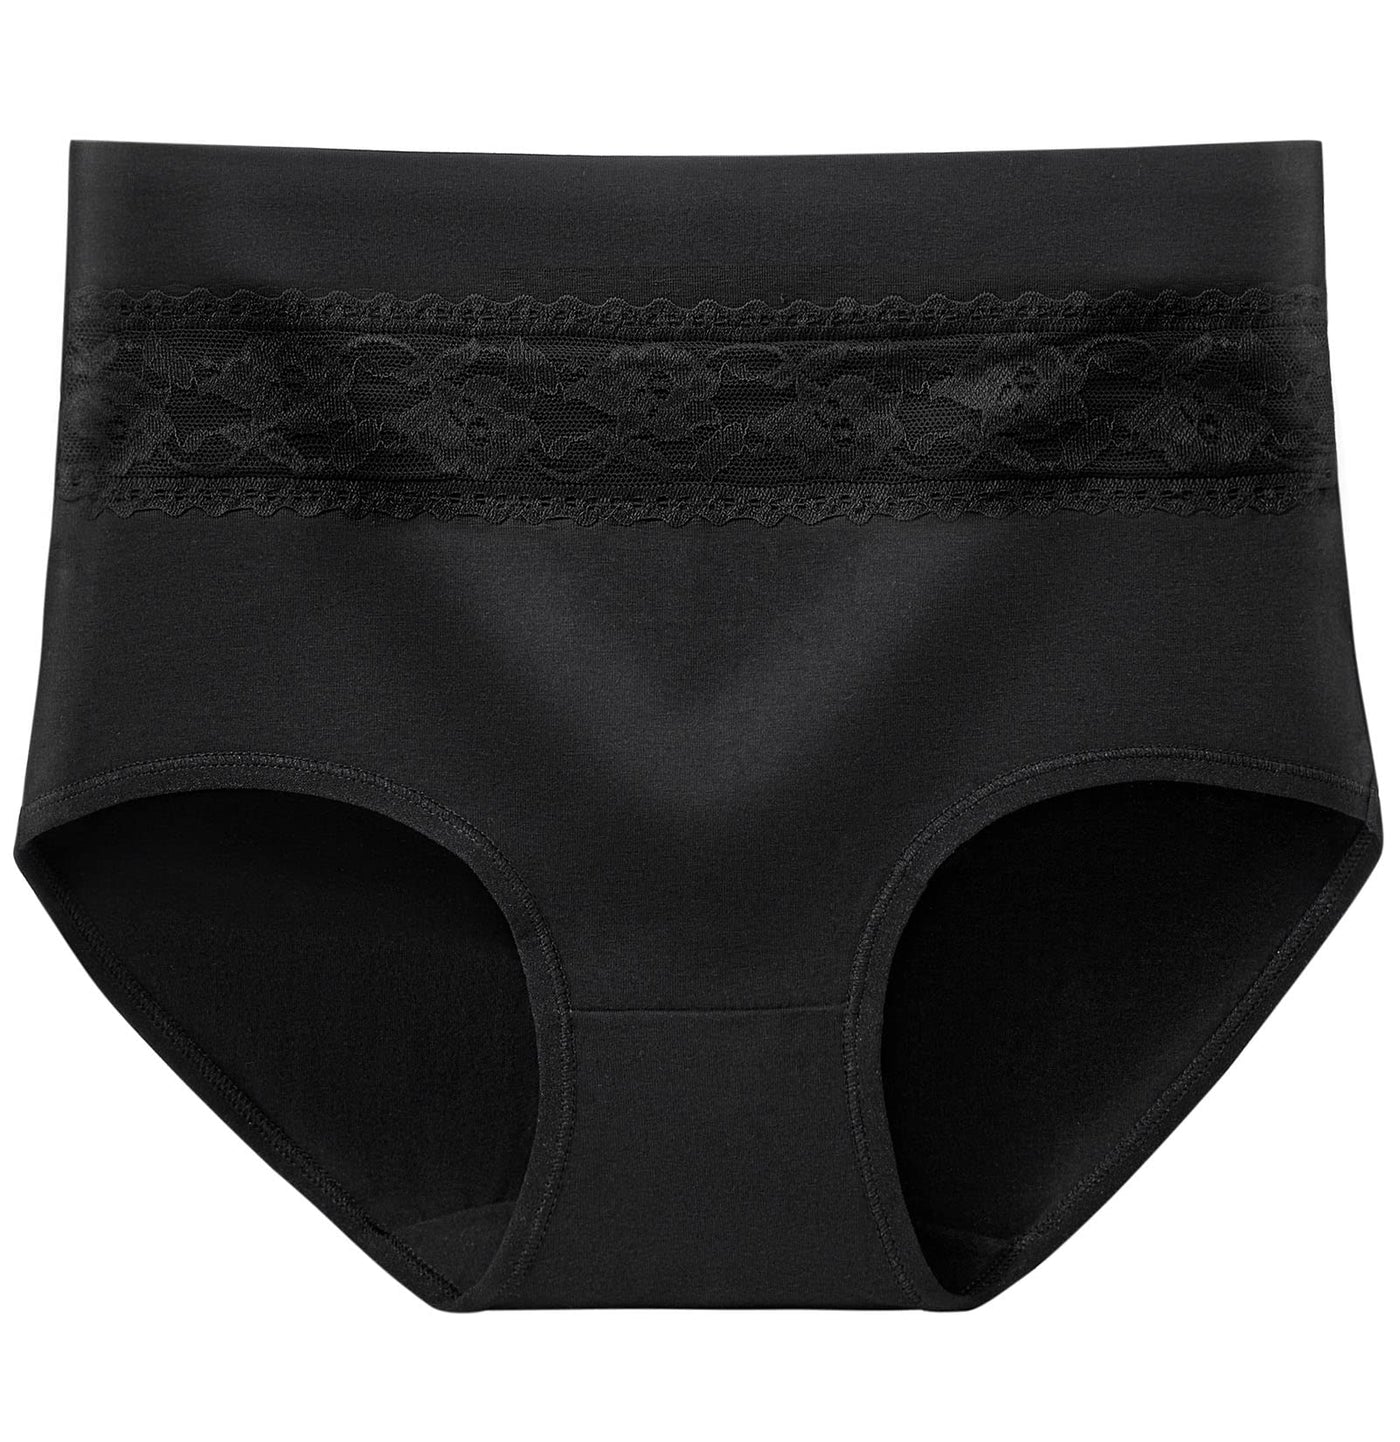 Plus Size 5 Pack Black Cotton High Waisted Full Briefs